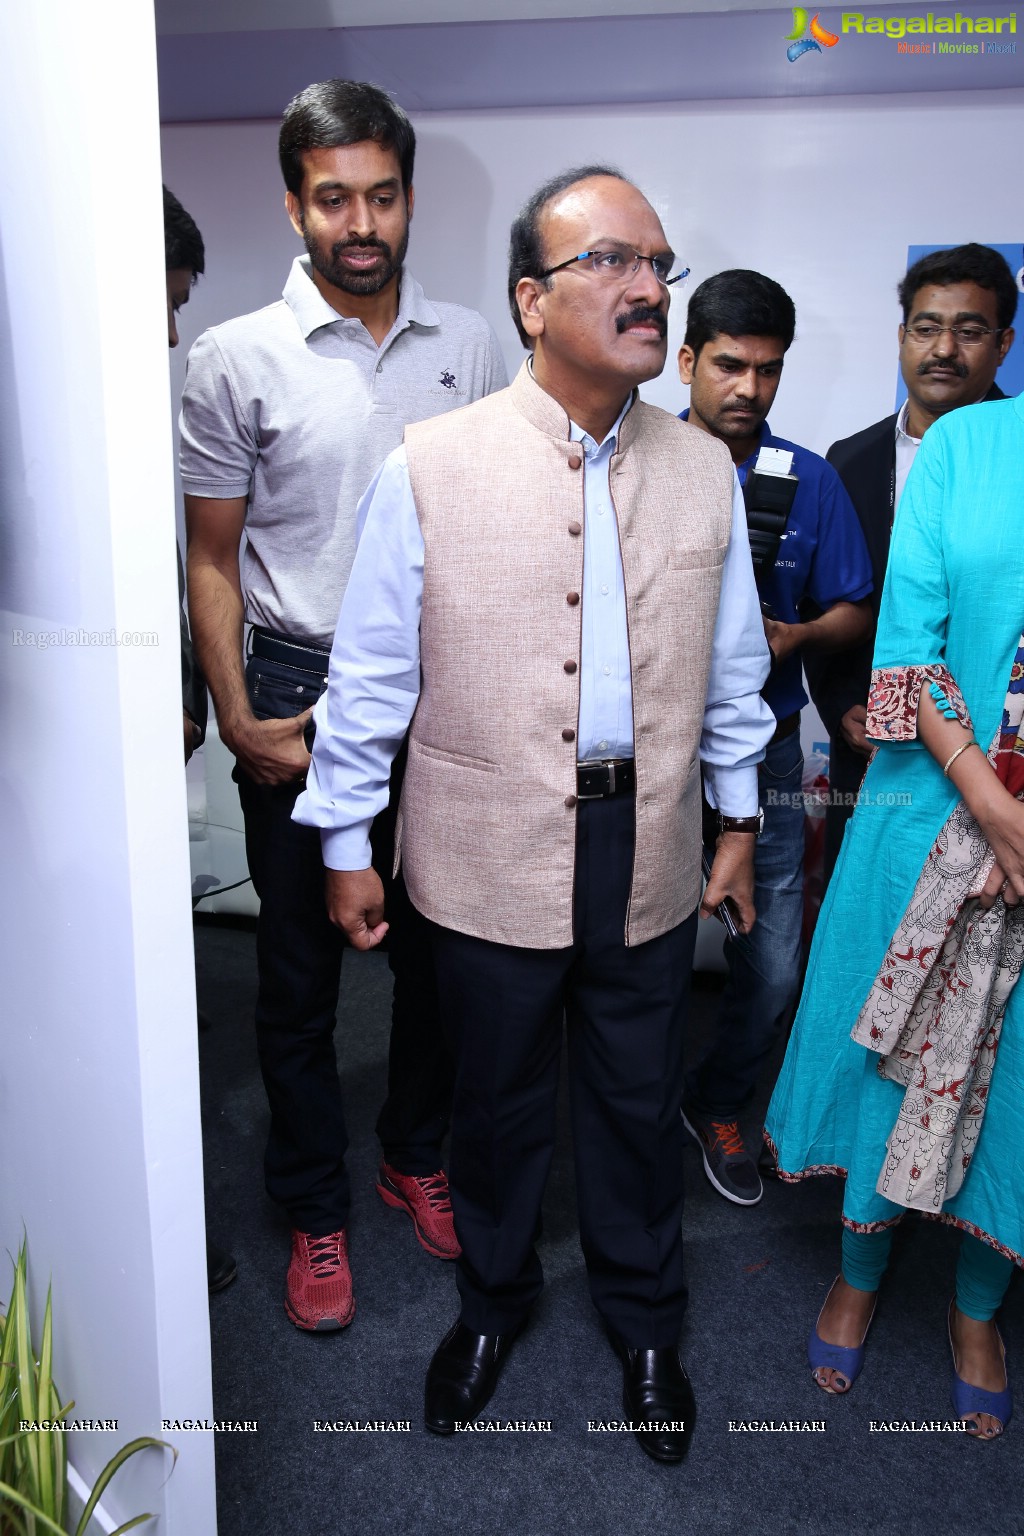 Pullela Gopichand launches HRA Expo at HITEX